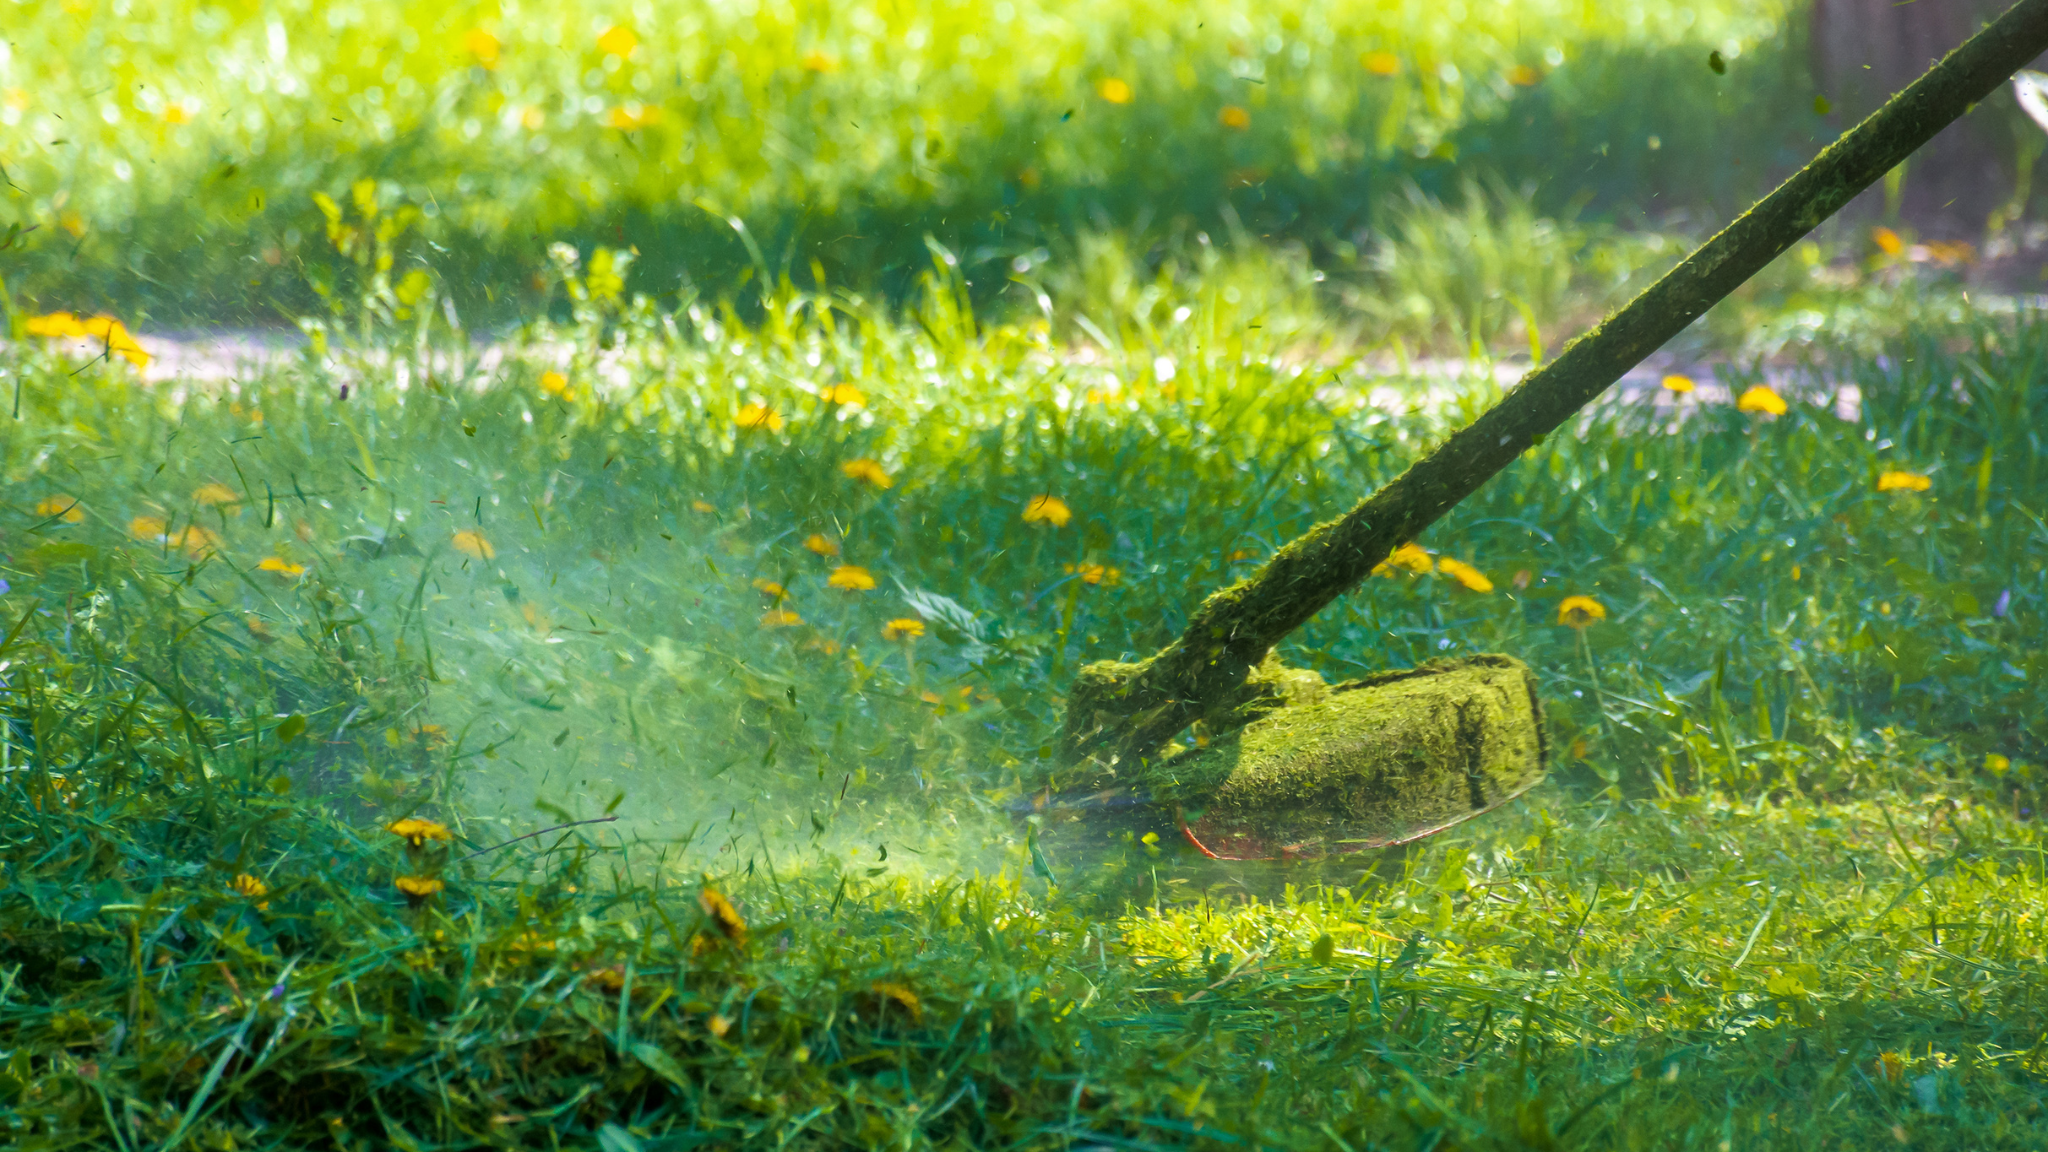 Lawn Treatment, NJ – What Is It and Why Is It Important